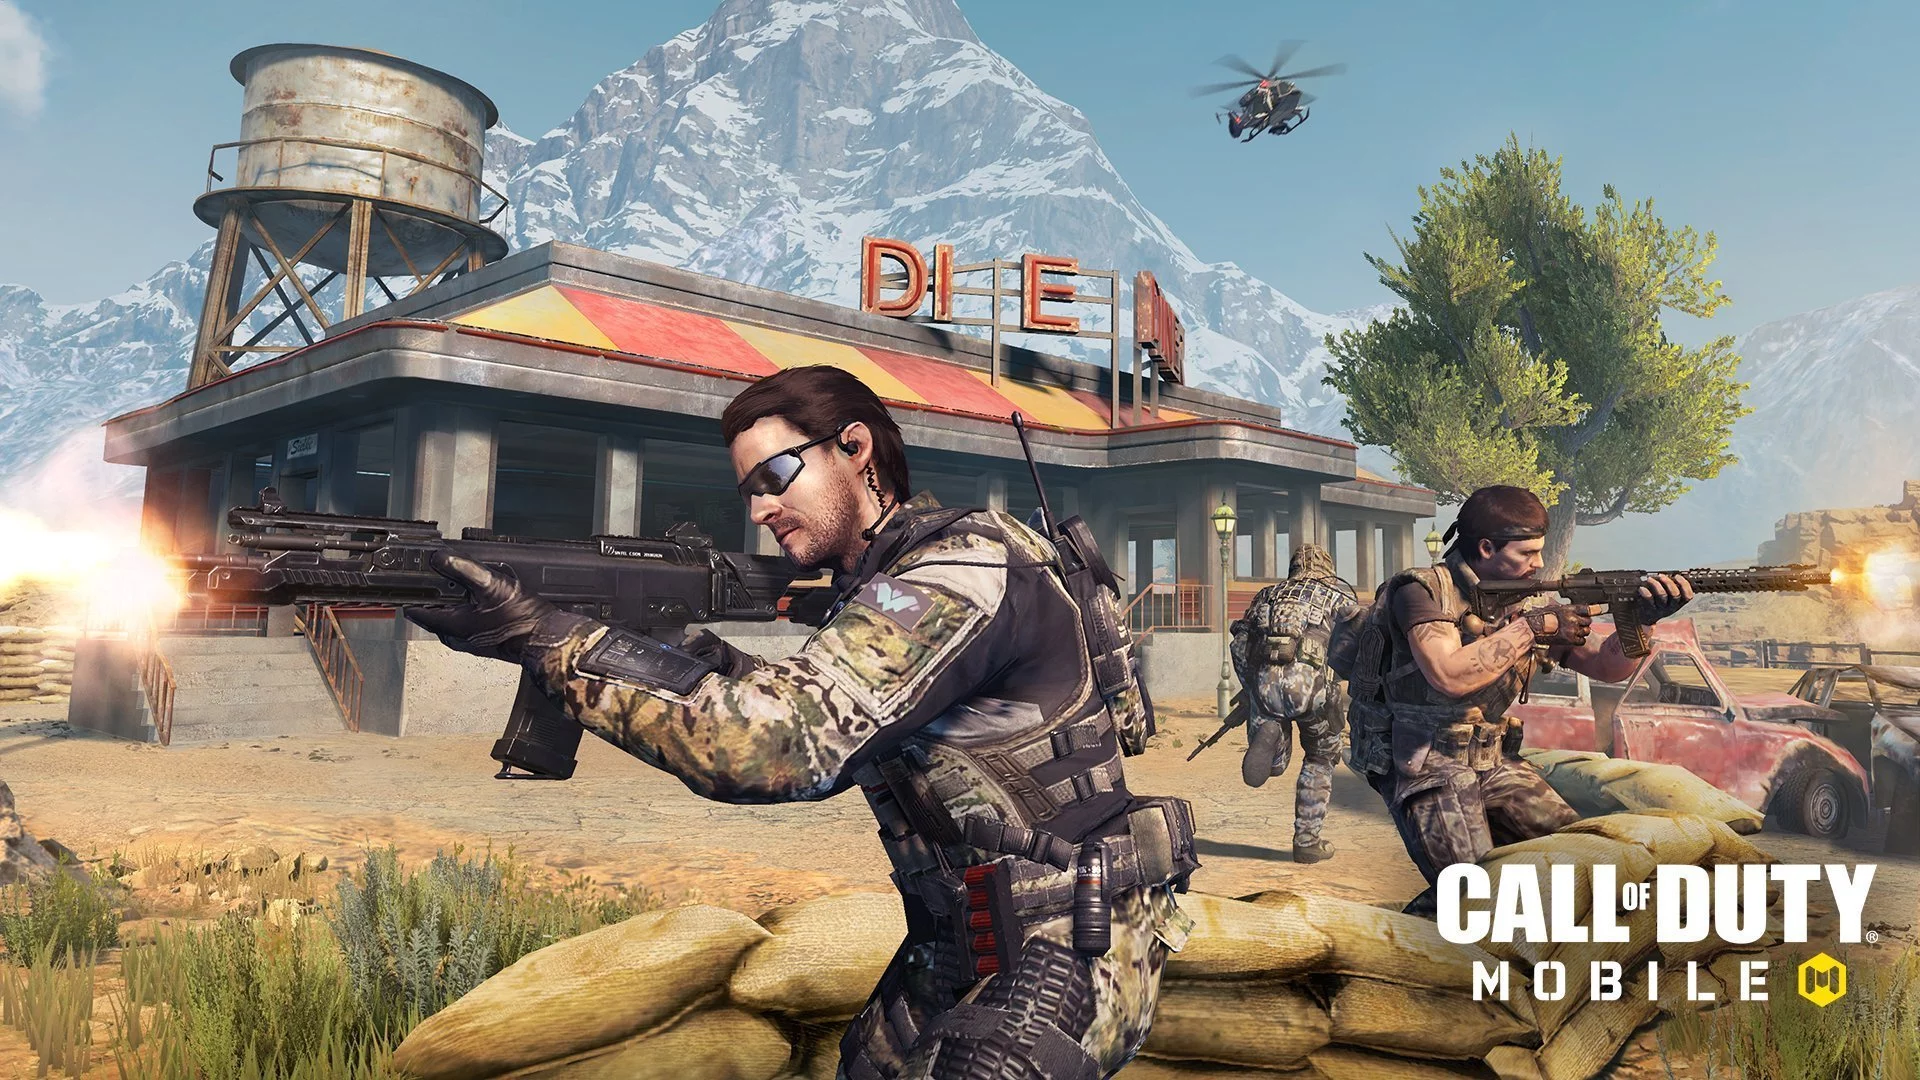 Call of Duty: Mobile beta test is now live, Android, iOS players